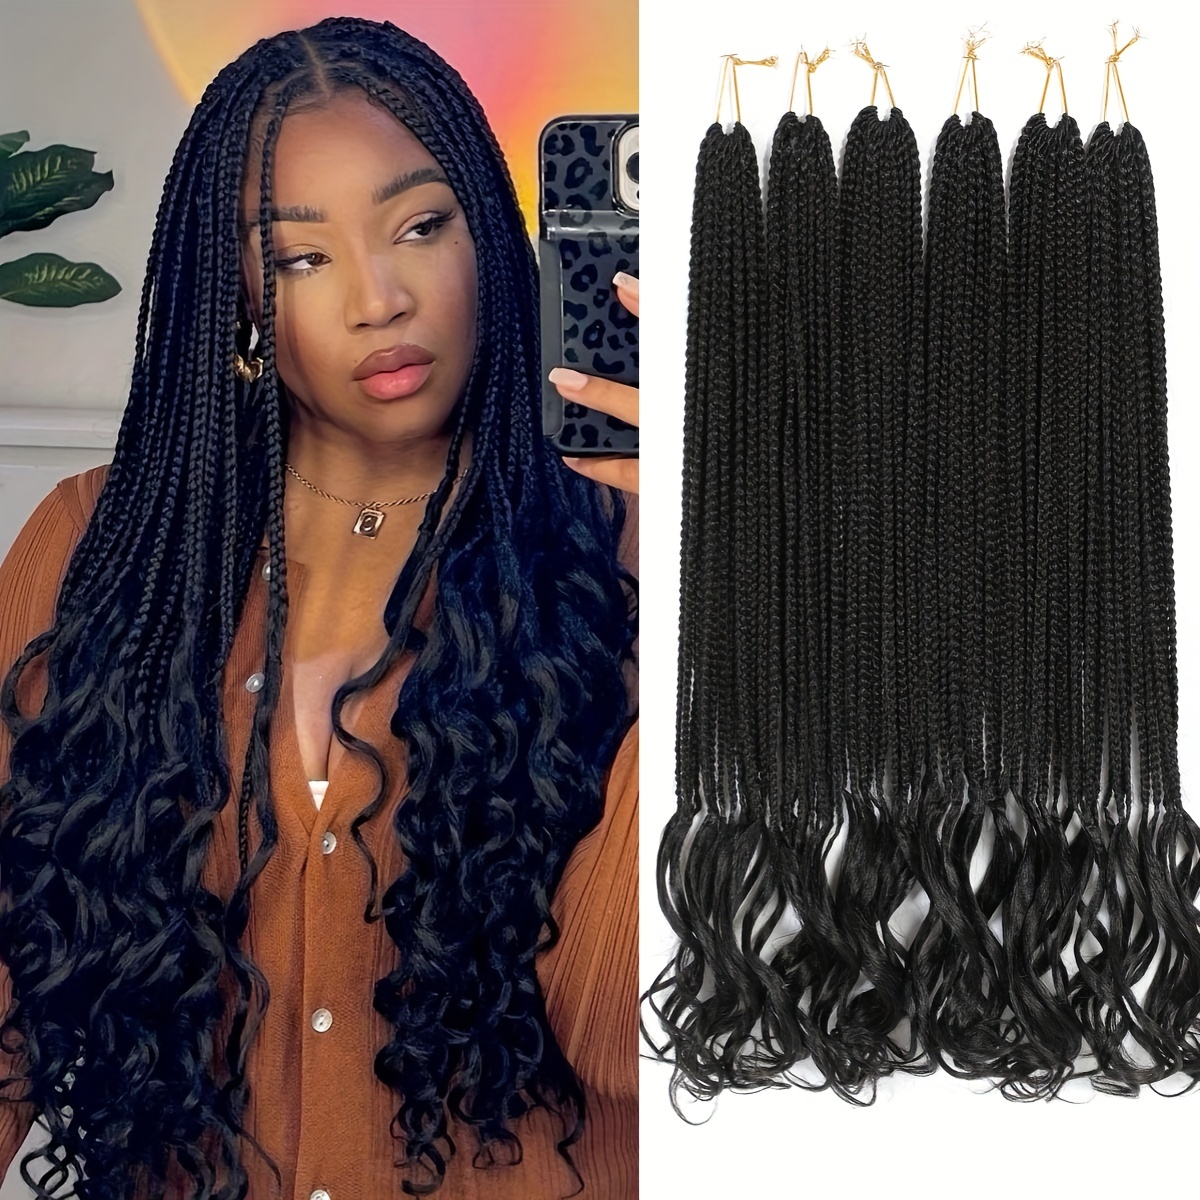 6 Packs Black Pre Looped Crochet Box Braids Hair with Curly Ends